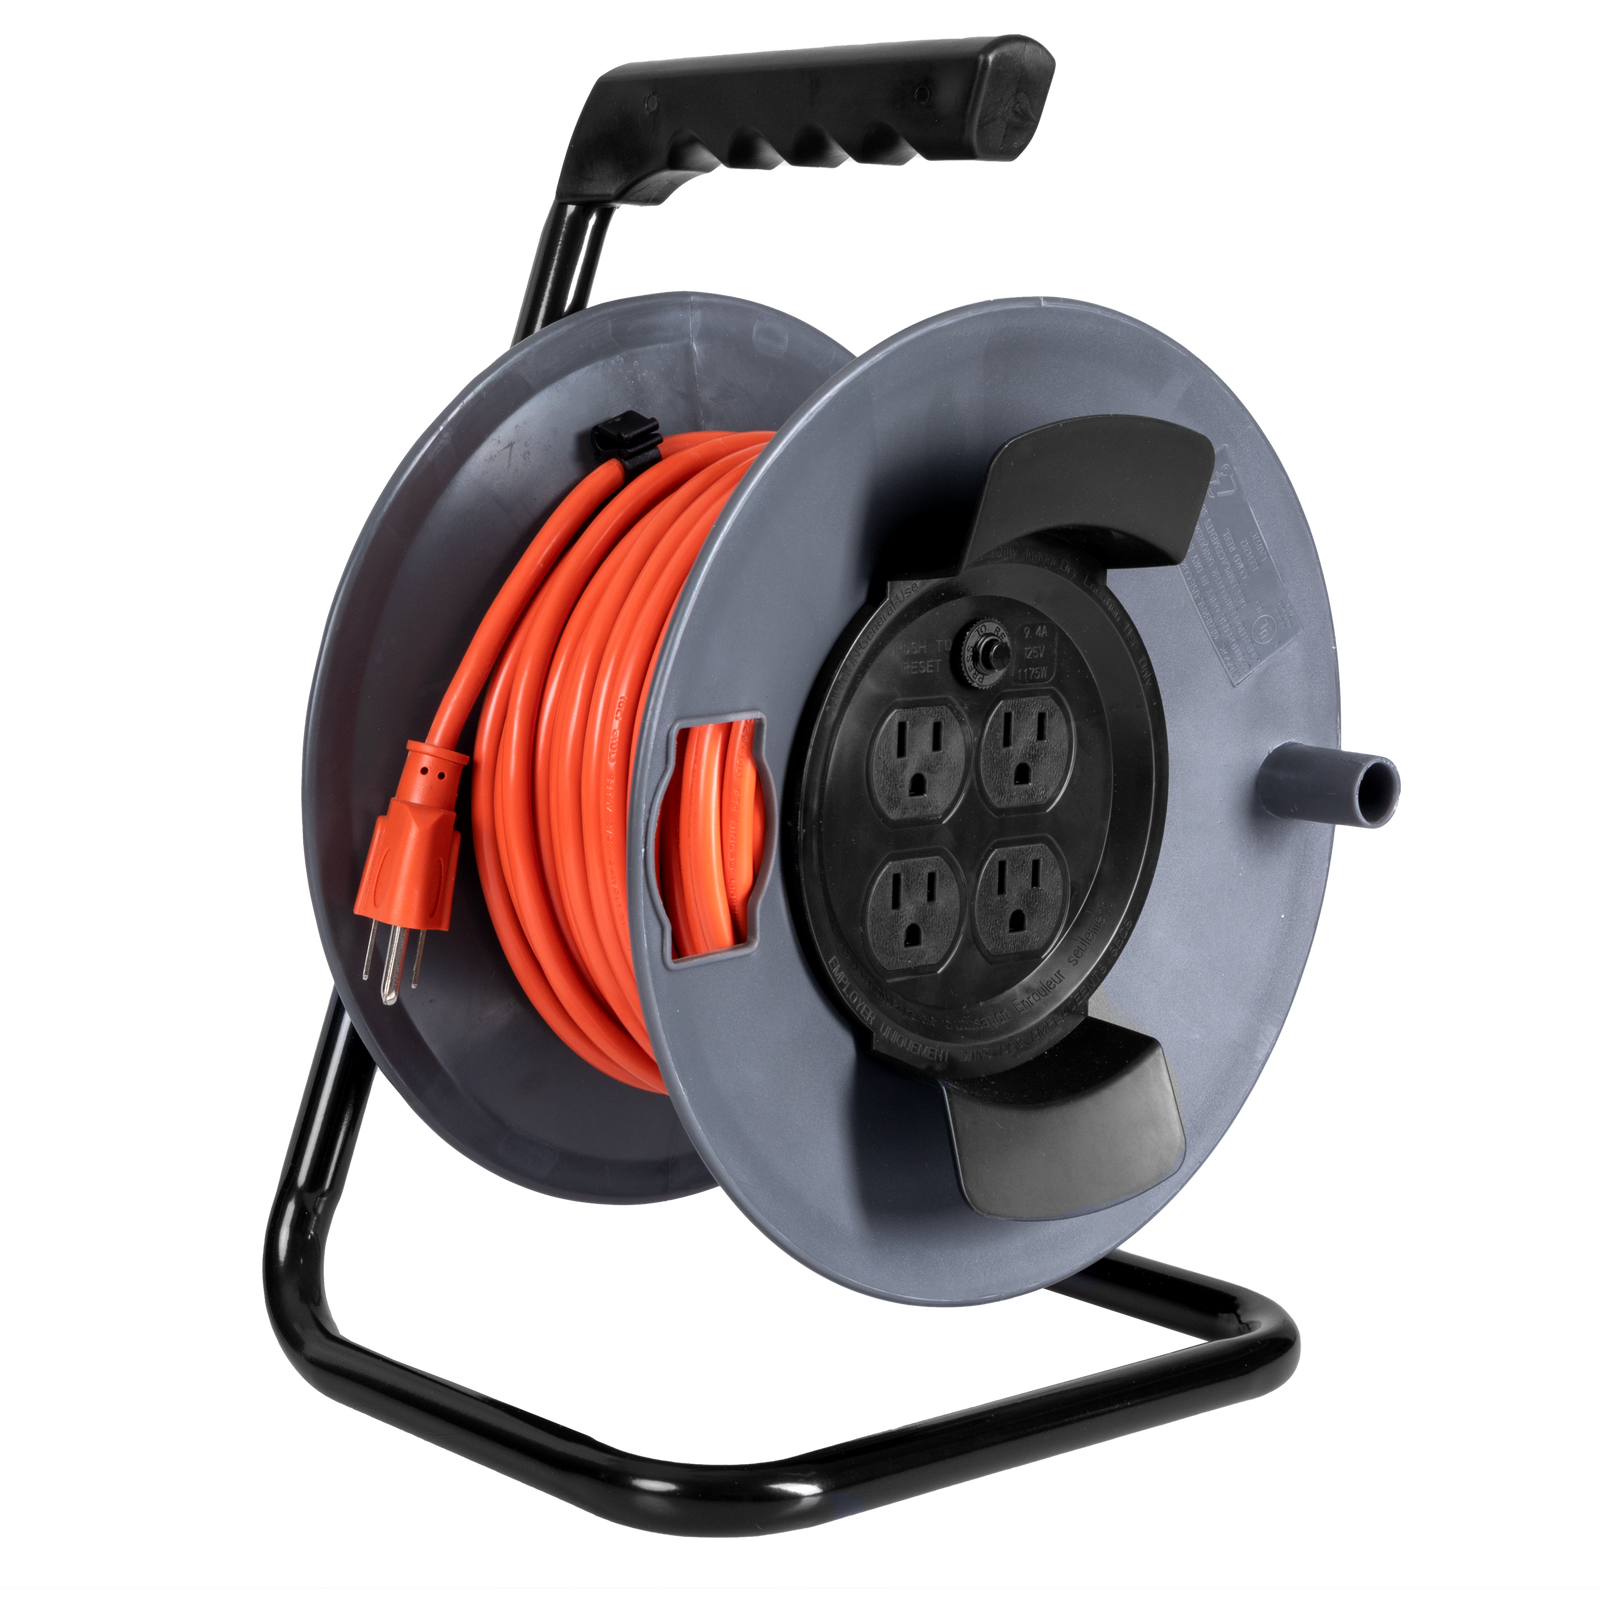  IRON FORGE CABLE Extension Cord Storage Reel with Metal Stand,  Black - Portable Cable Reel, Holds Up to 100 Ft of Electrical Cord, Hose,  or Rope : Tools & Home Improvement